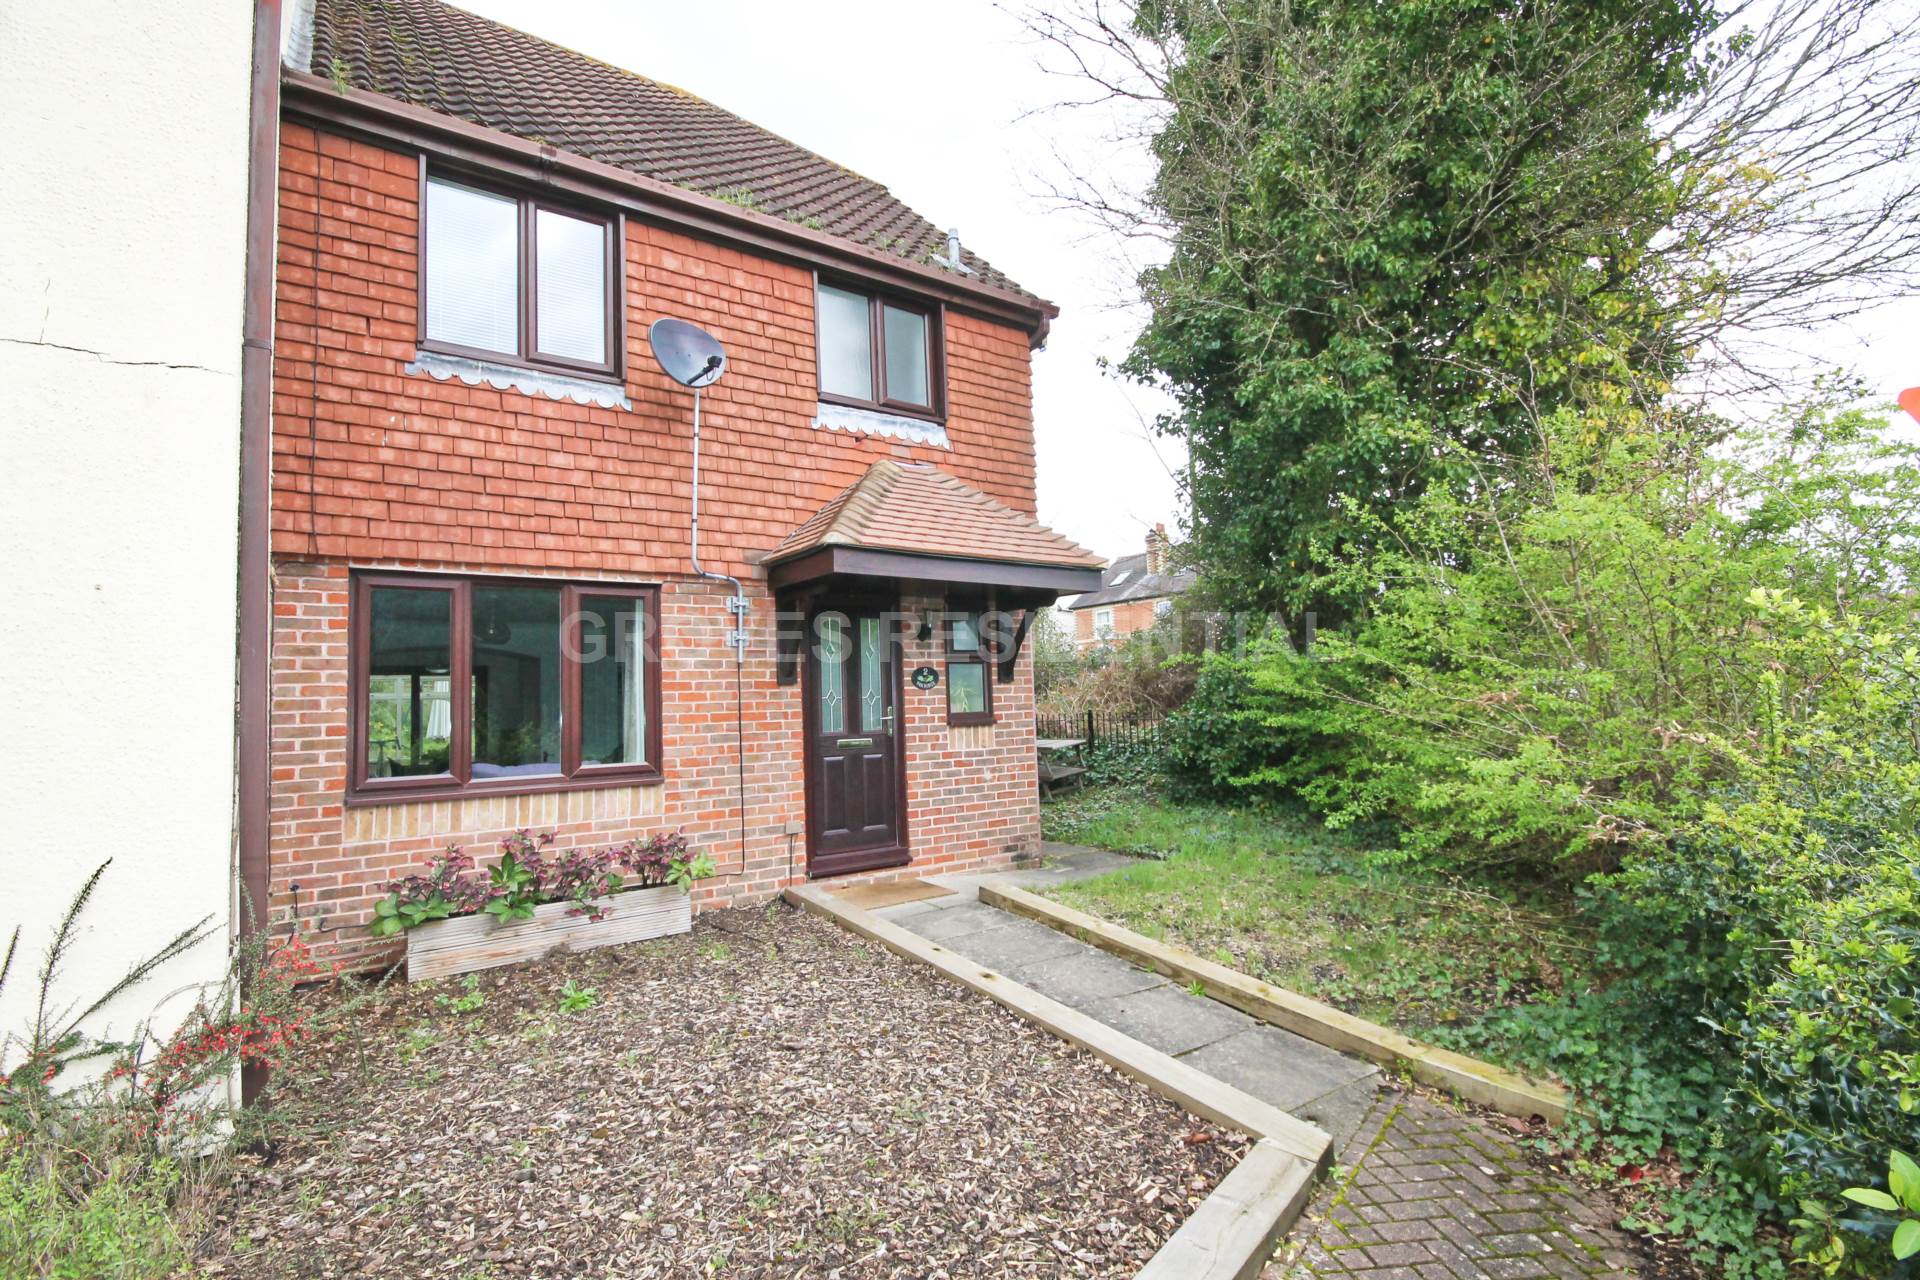 3 bed End Terraced House for rent in Woking. From Groves Residential